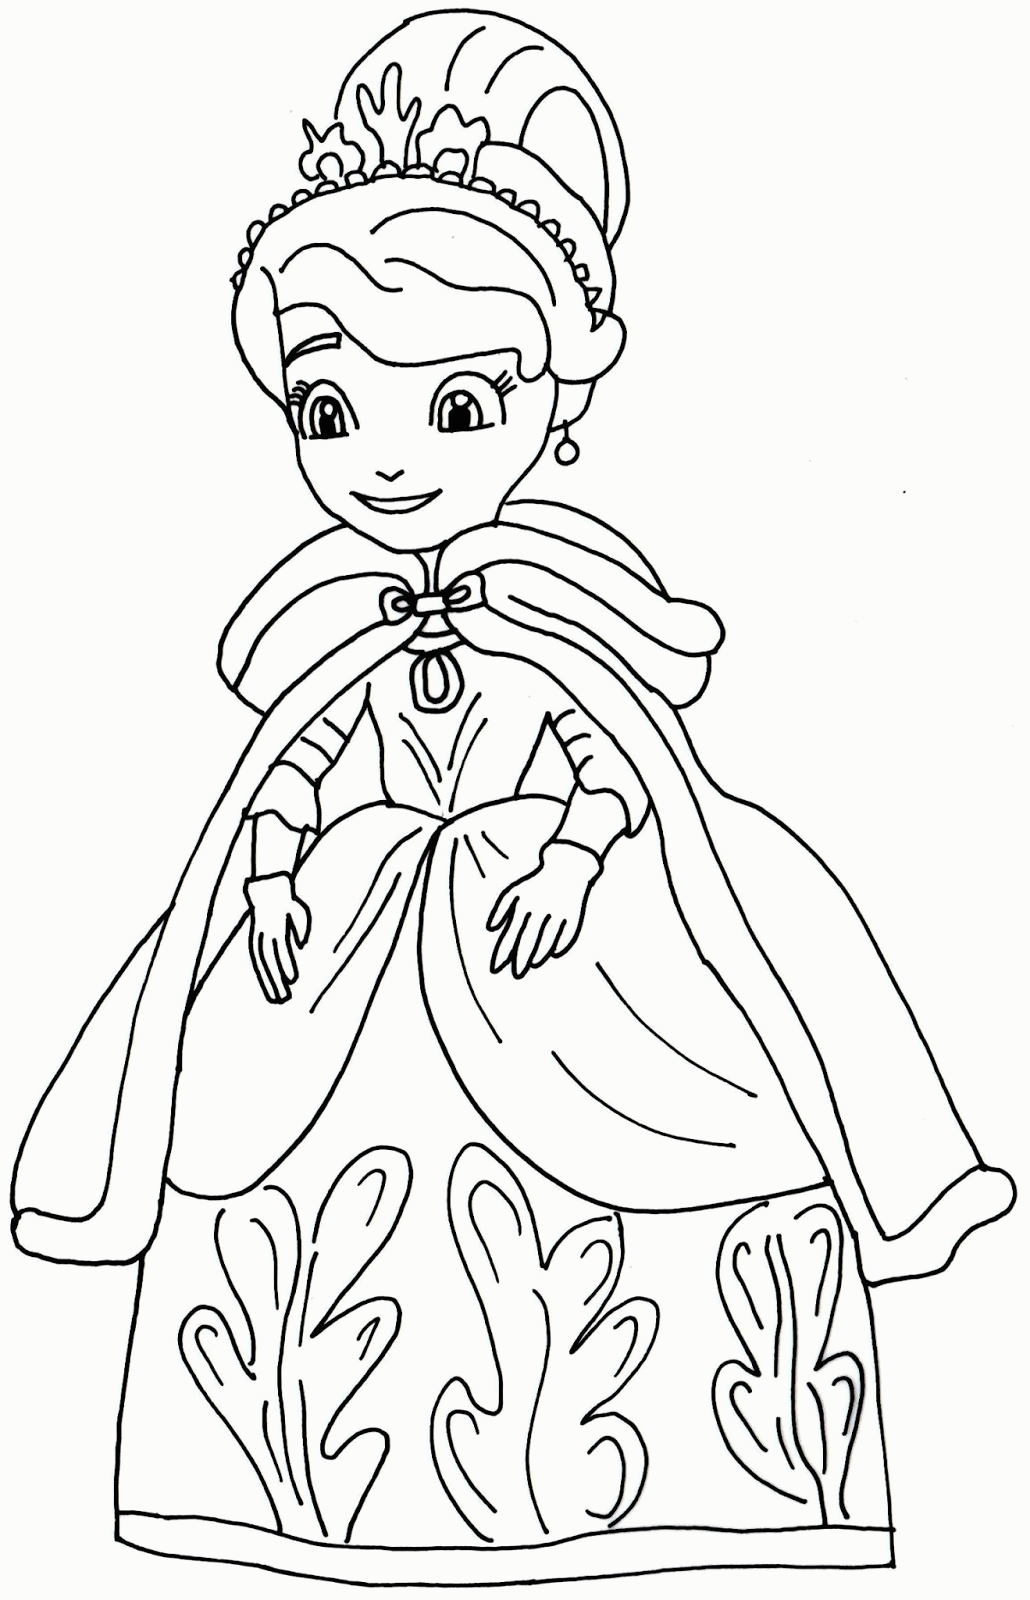 Sofia The First Coloring Pages - Coloring Home